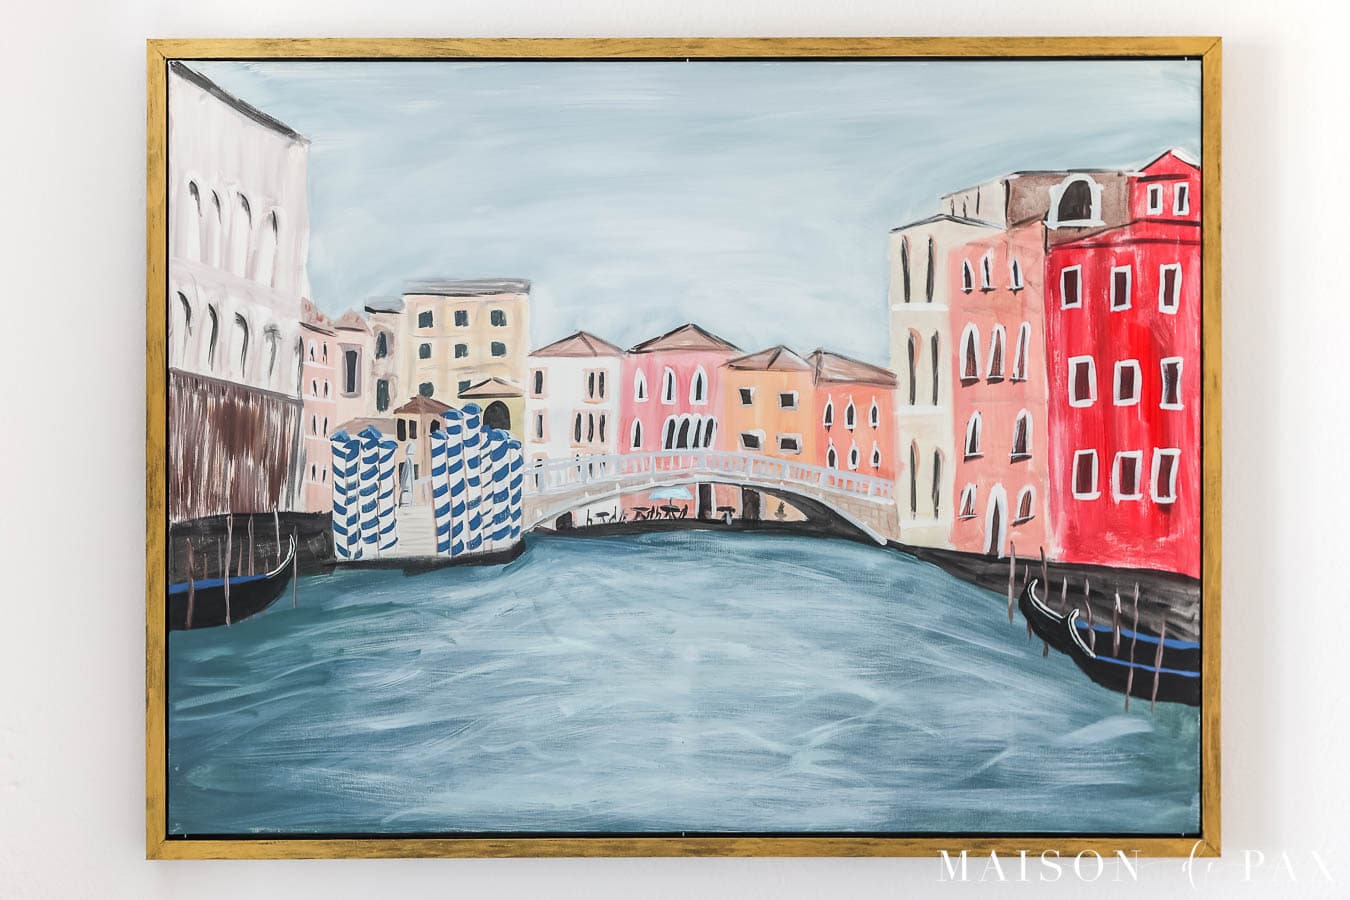 acrylic painting of canal scene in venice